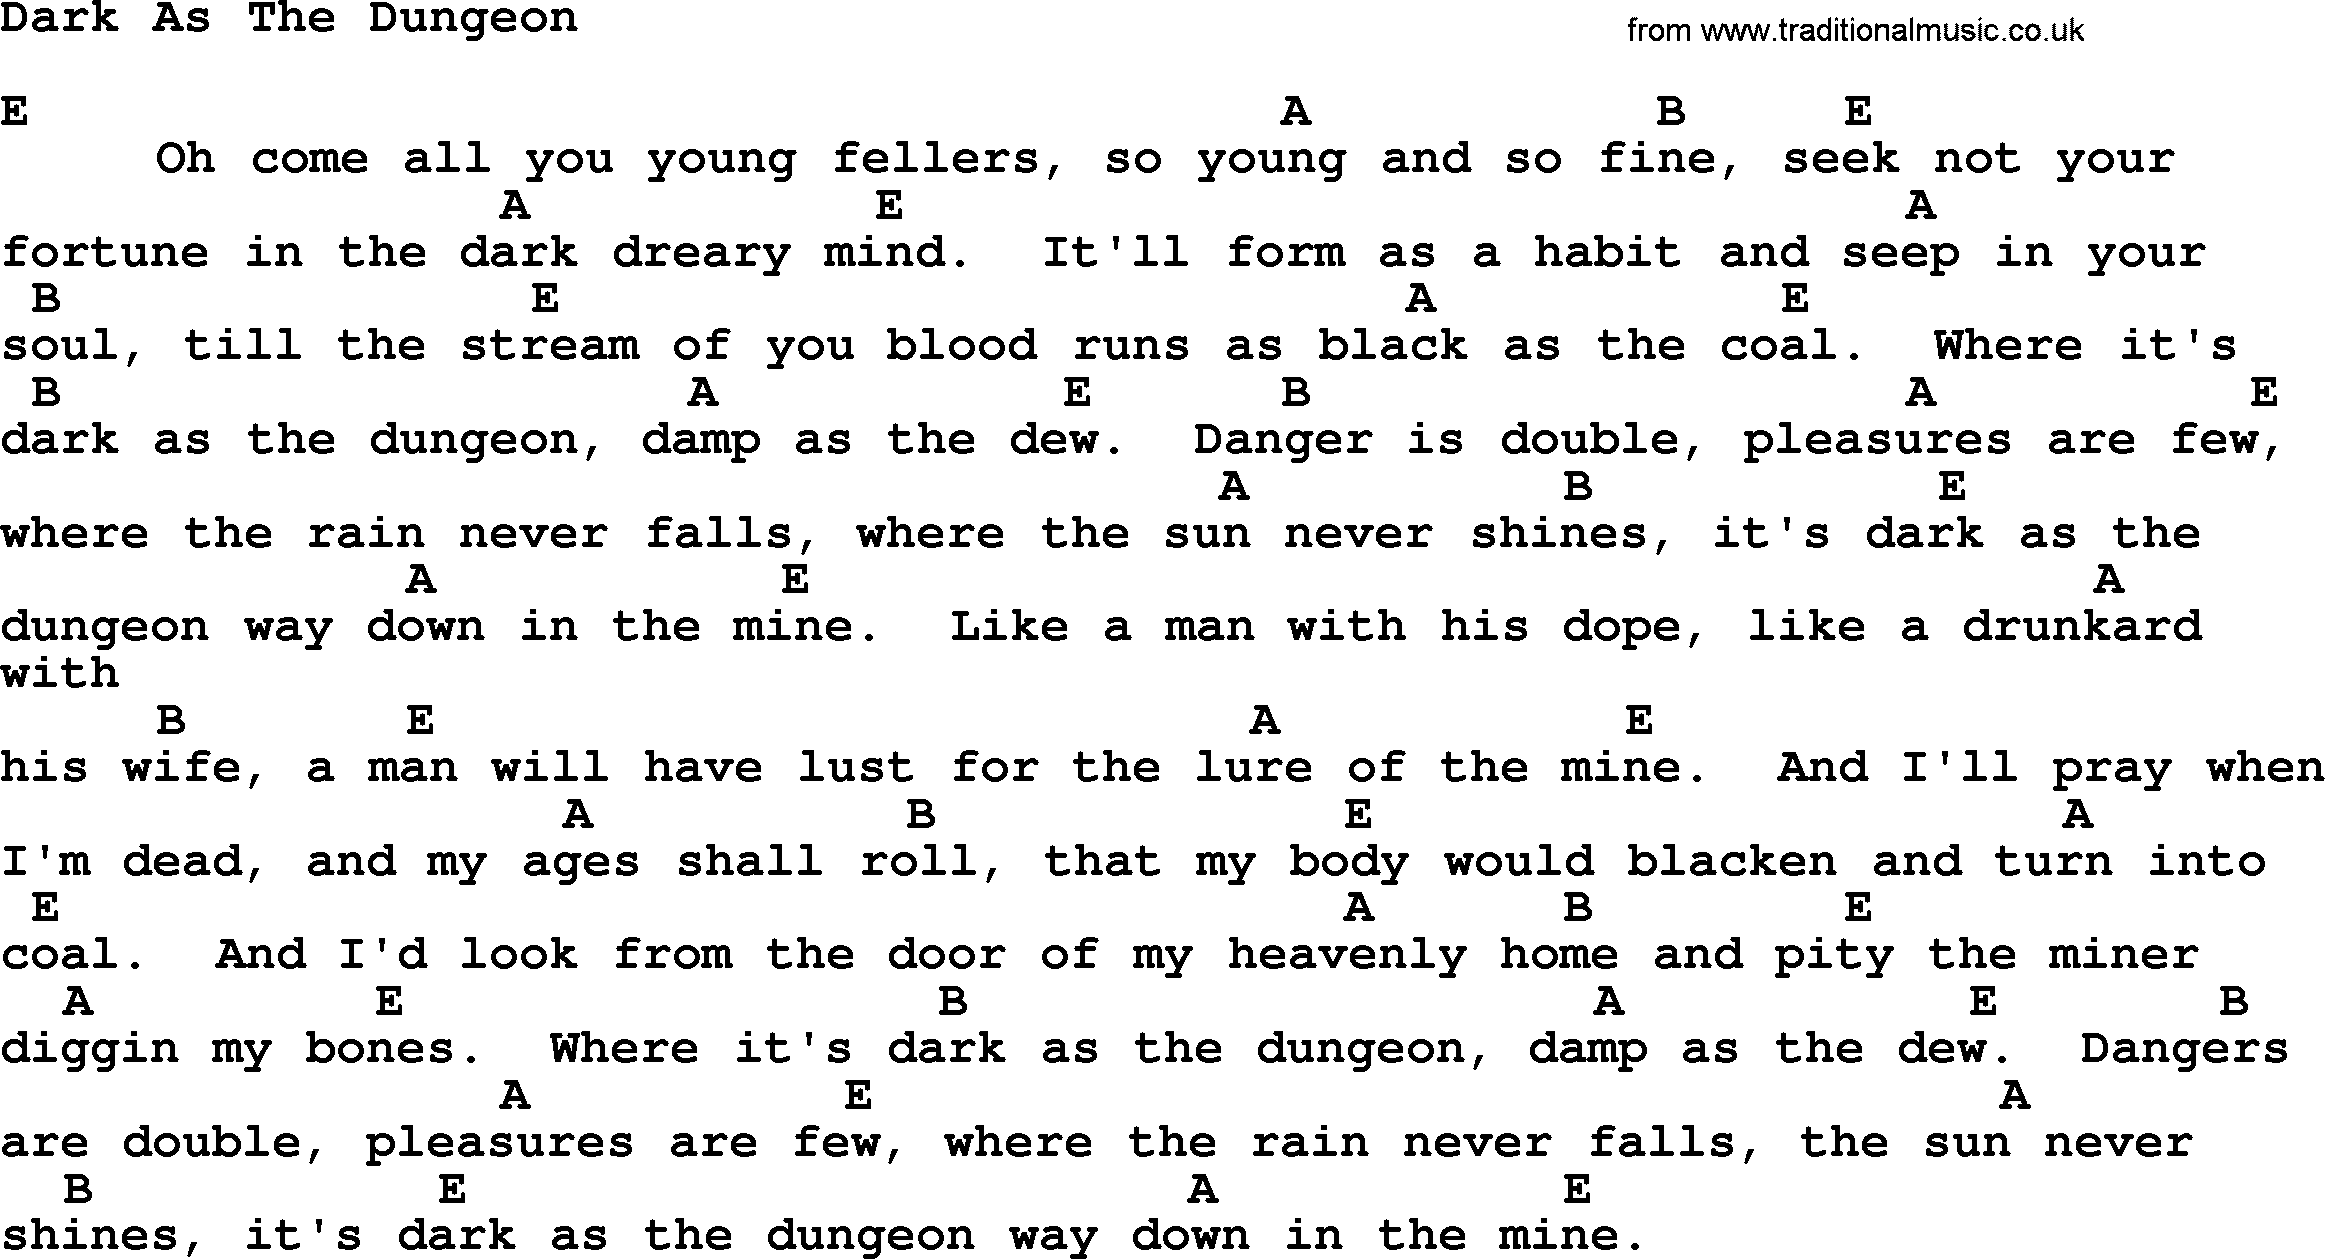 Johnny Cash song Dark As The Dungeon(2), lyrics and chords